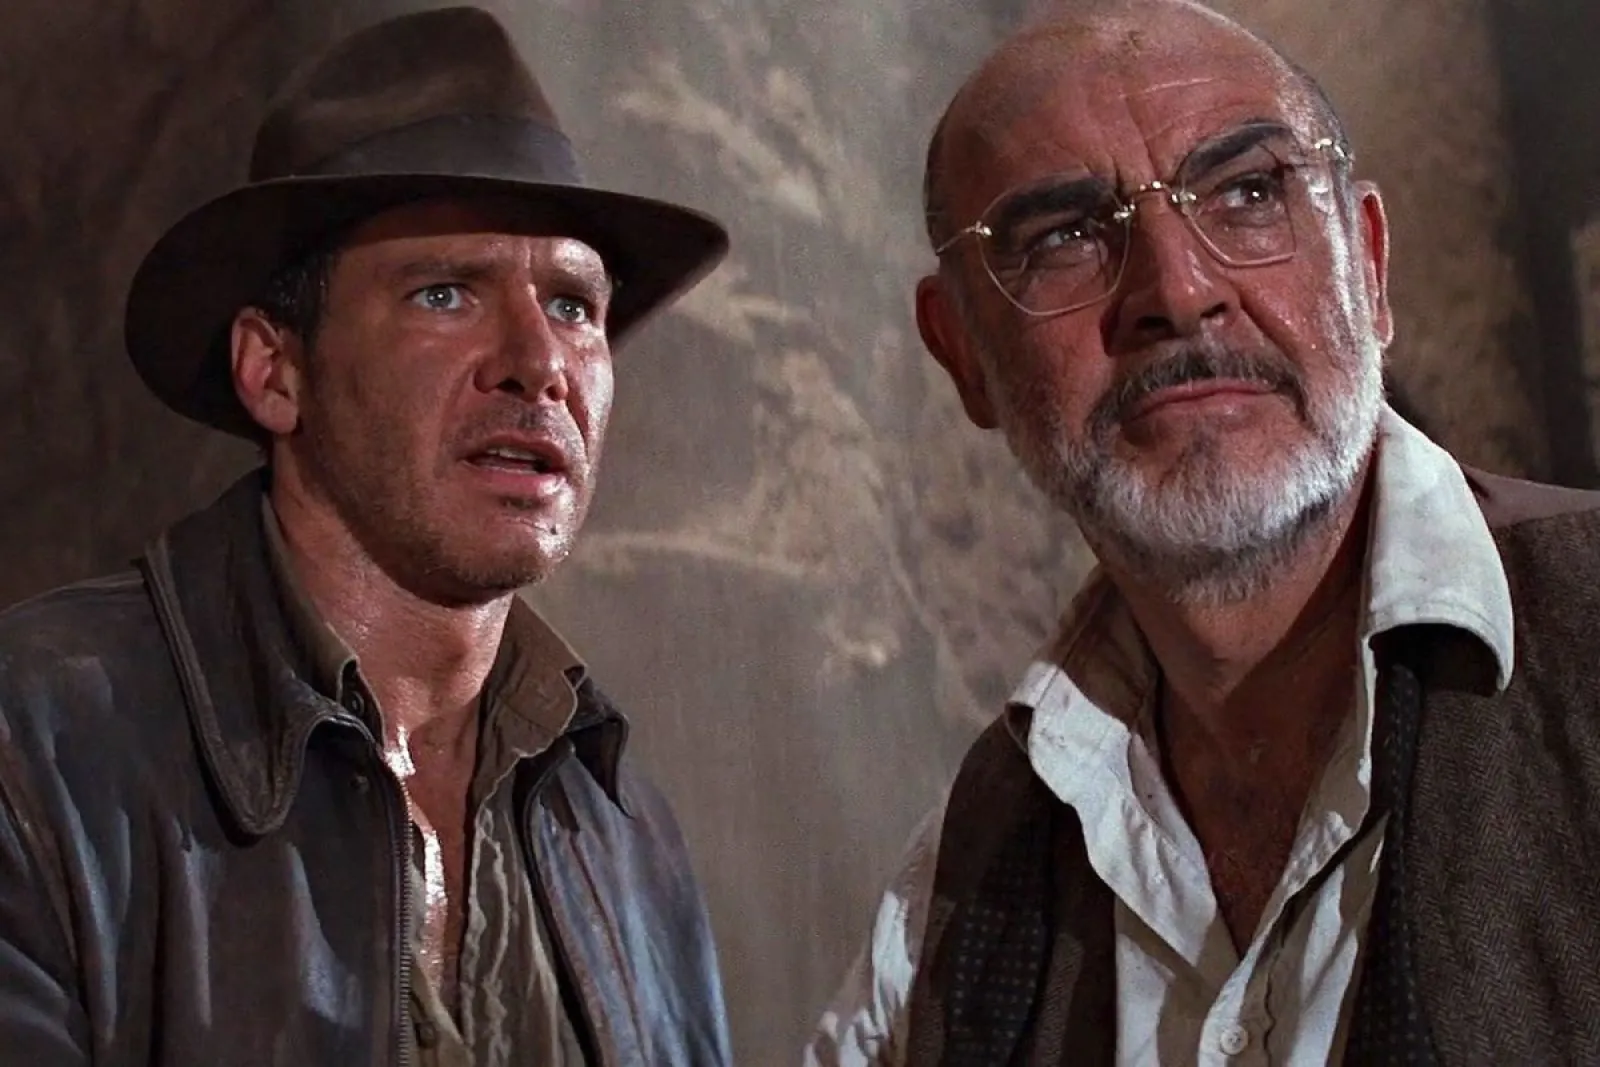 Harrison Ford as Indiana Jones and Sean Connery as Henry Jones in Indiana Jones and the Last Crusade